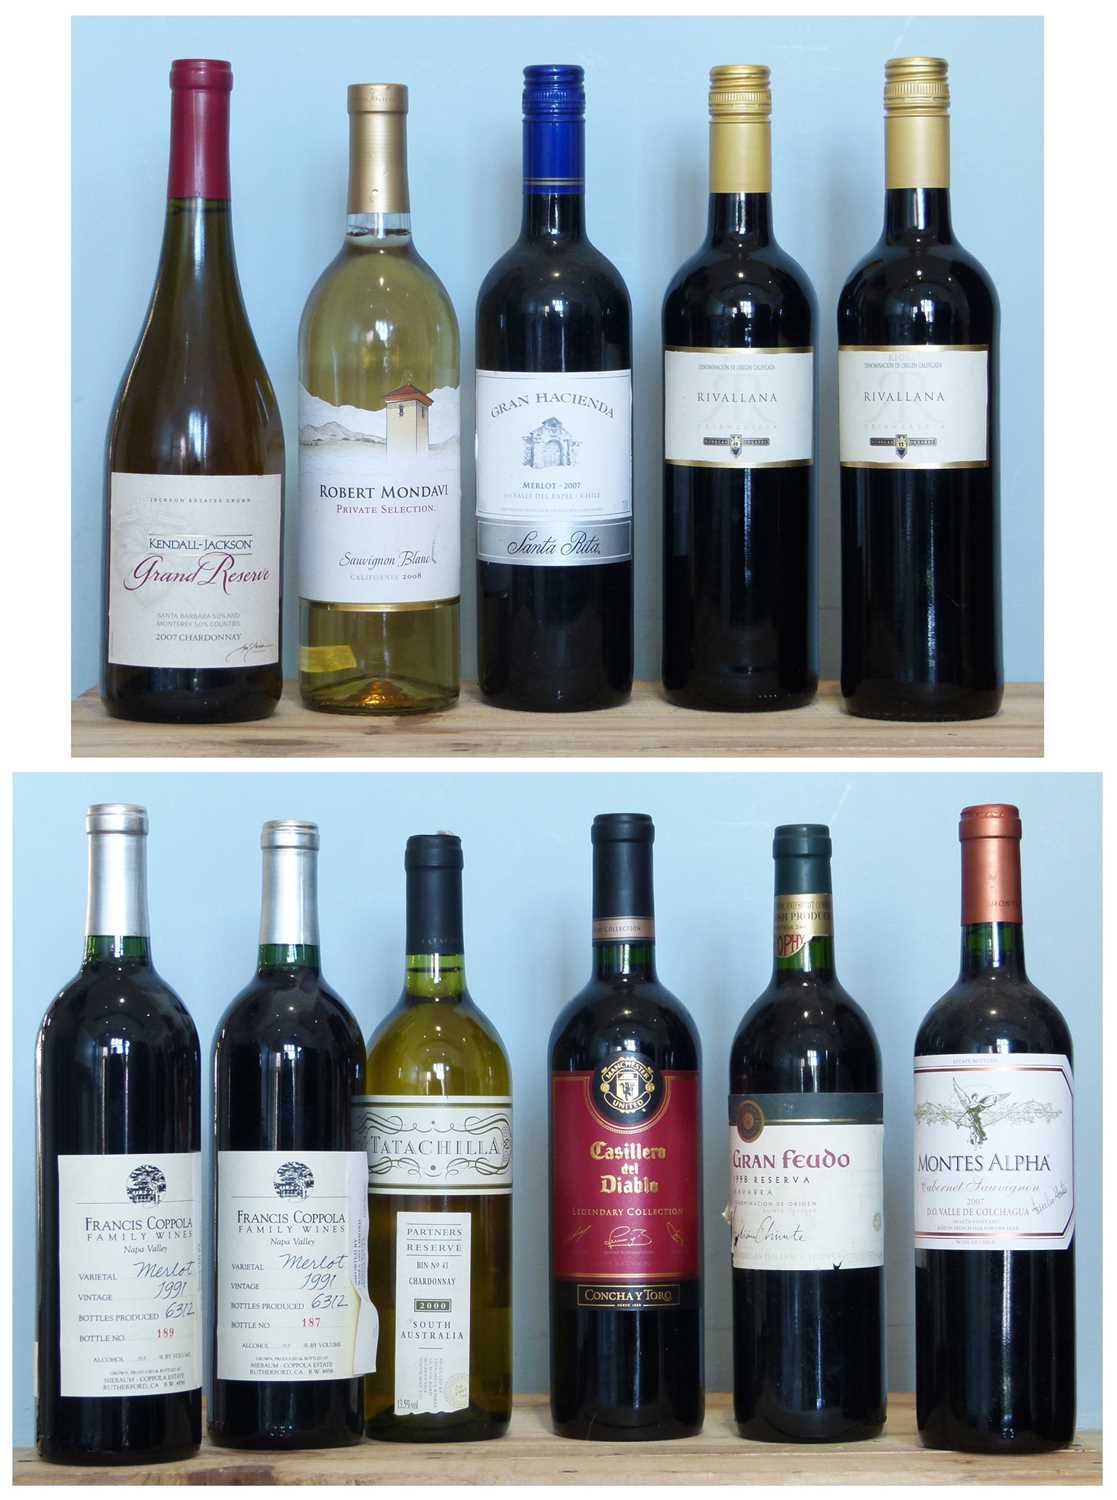 Lot 1 - 11 Bottles Mixed Lot Fine Wines to include California, Chile and Rioja